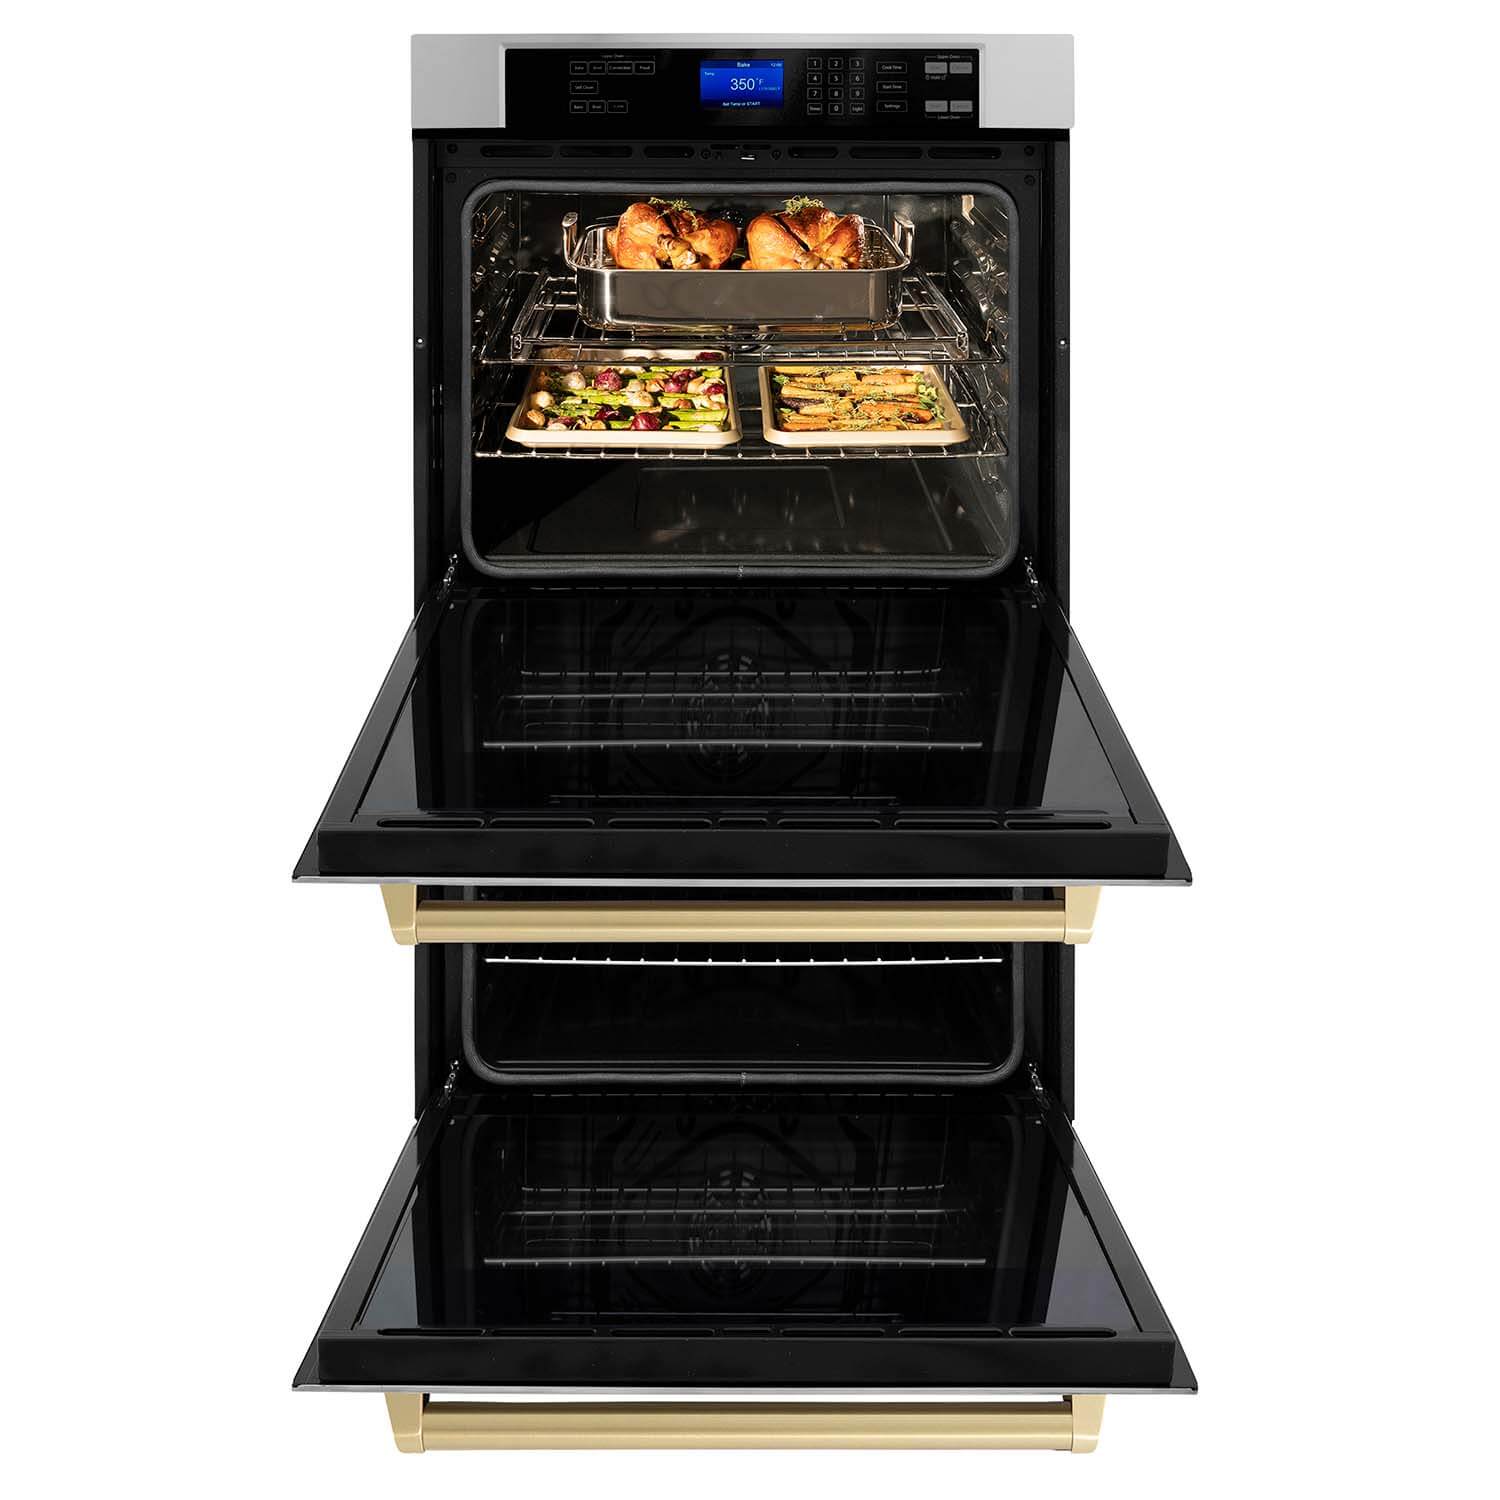 ZLINE 30" Autograph Edition Double Wall Oven with Self Clean and True Convection in Fingerprint Resistant Stainless Steel and Polished Gold (AWDSZ-30-G)